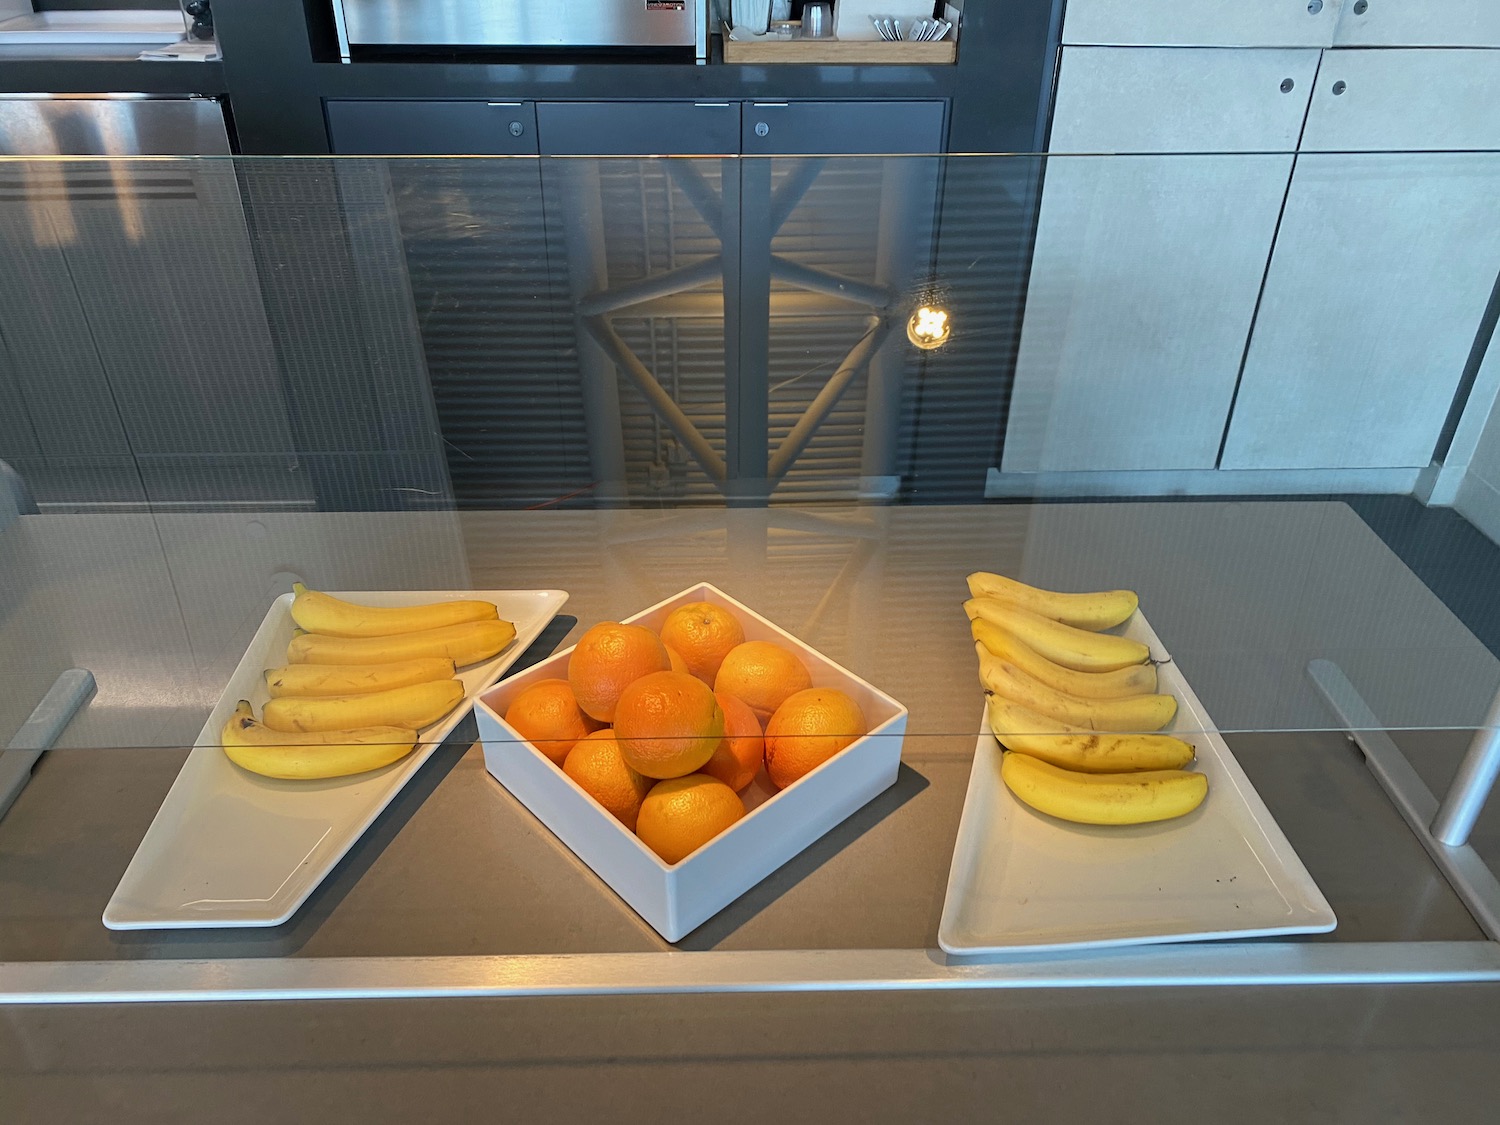 a group of bananas and oranges on plates